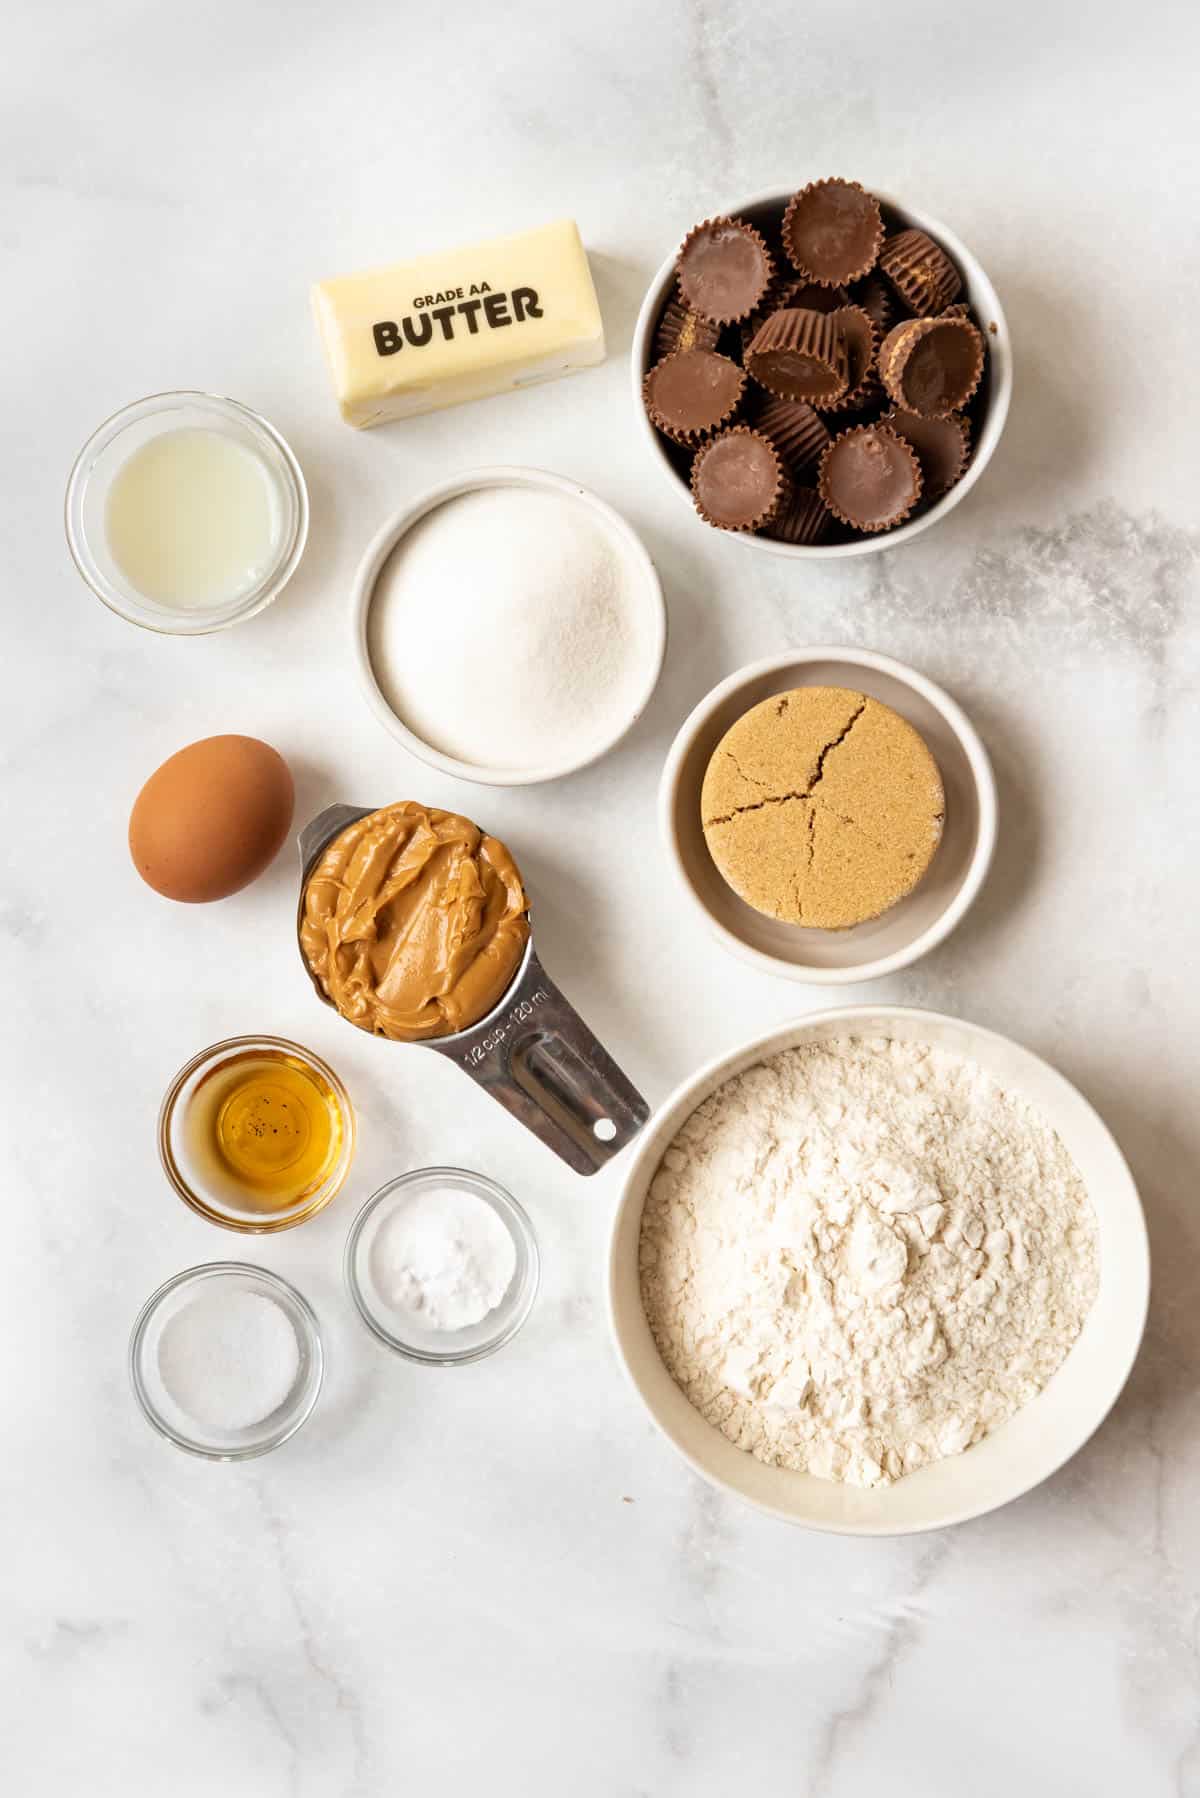 Ingredients for Peanut Butter Cup Cookies.